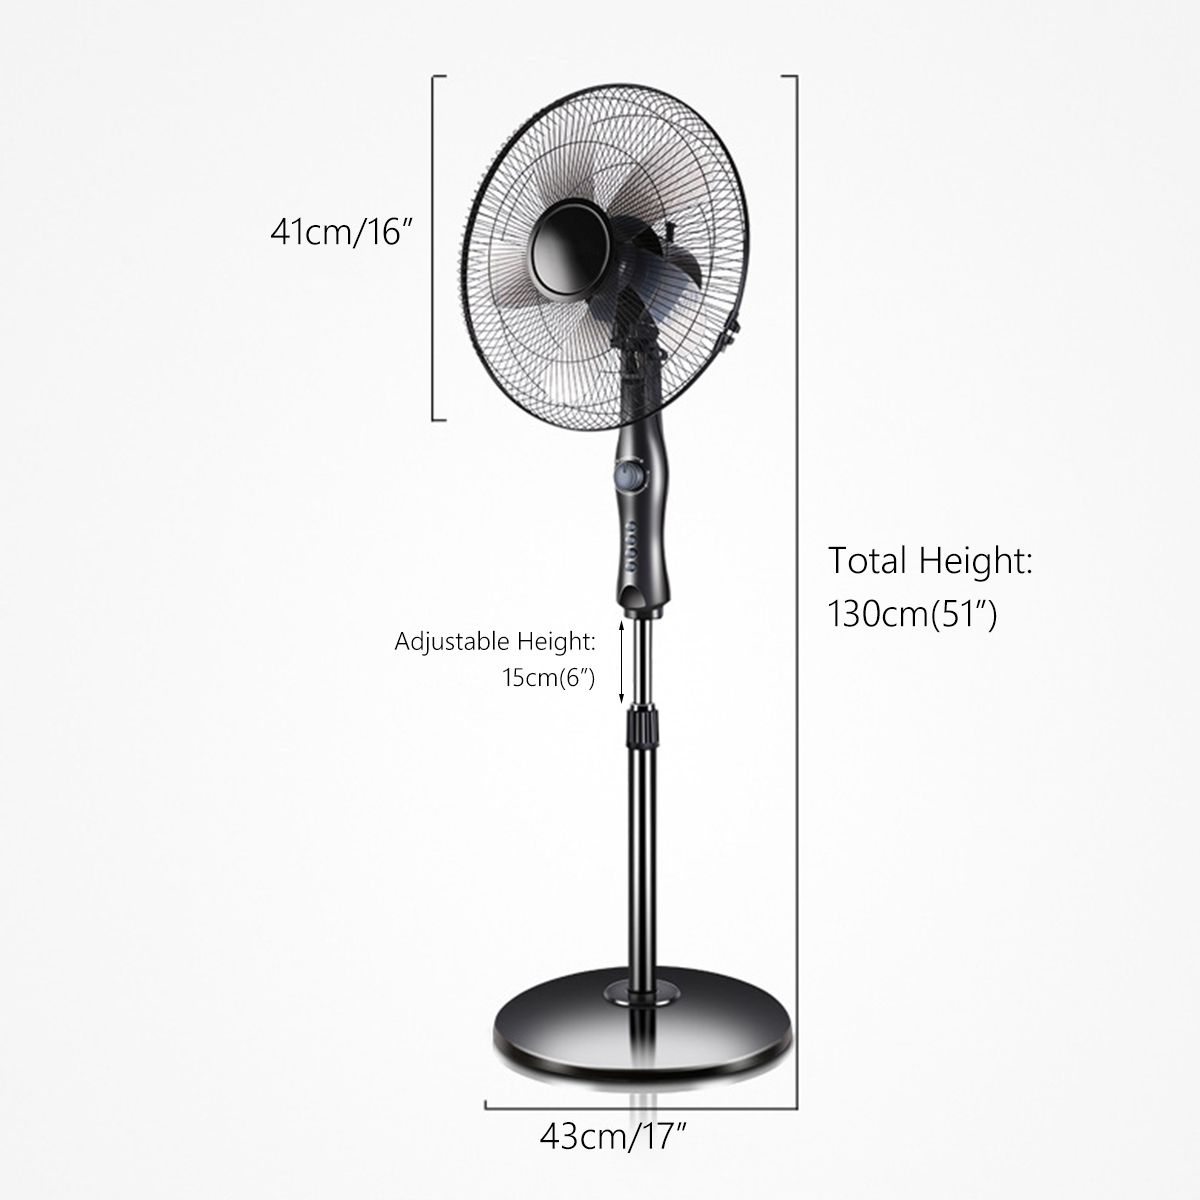 16-inch-Floor-Fan-Stand-Timer-Fan-15cm-Adjustable-Height-amp-Angle-with-Remote-Control-1568417